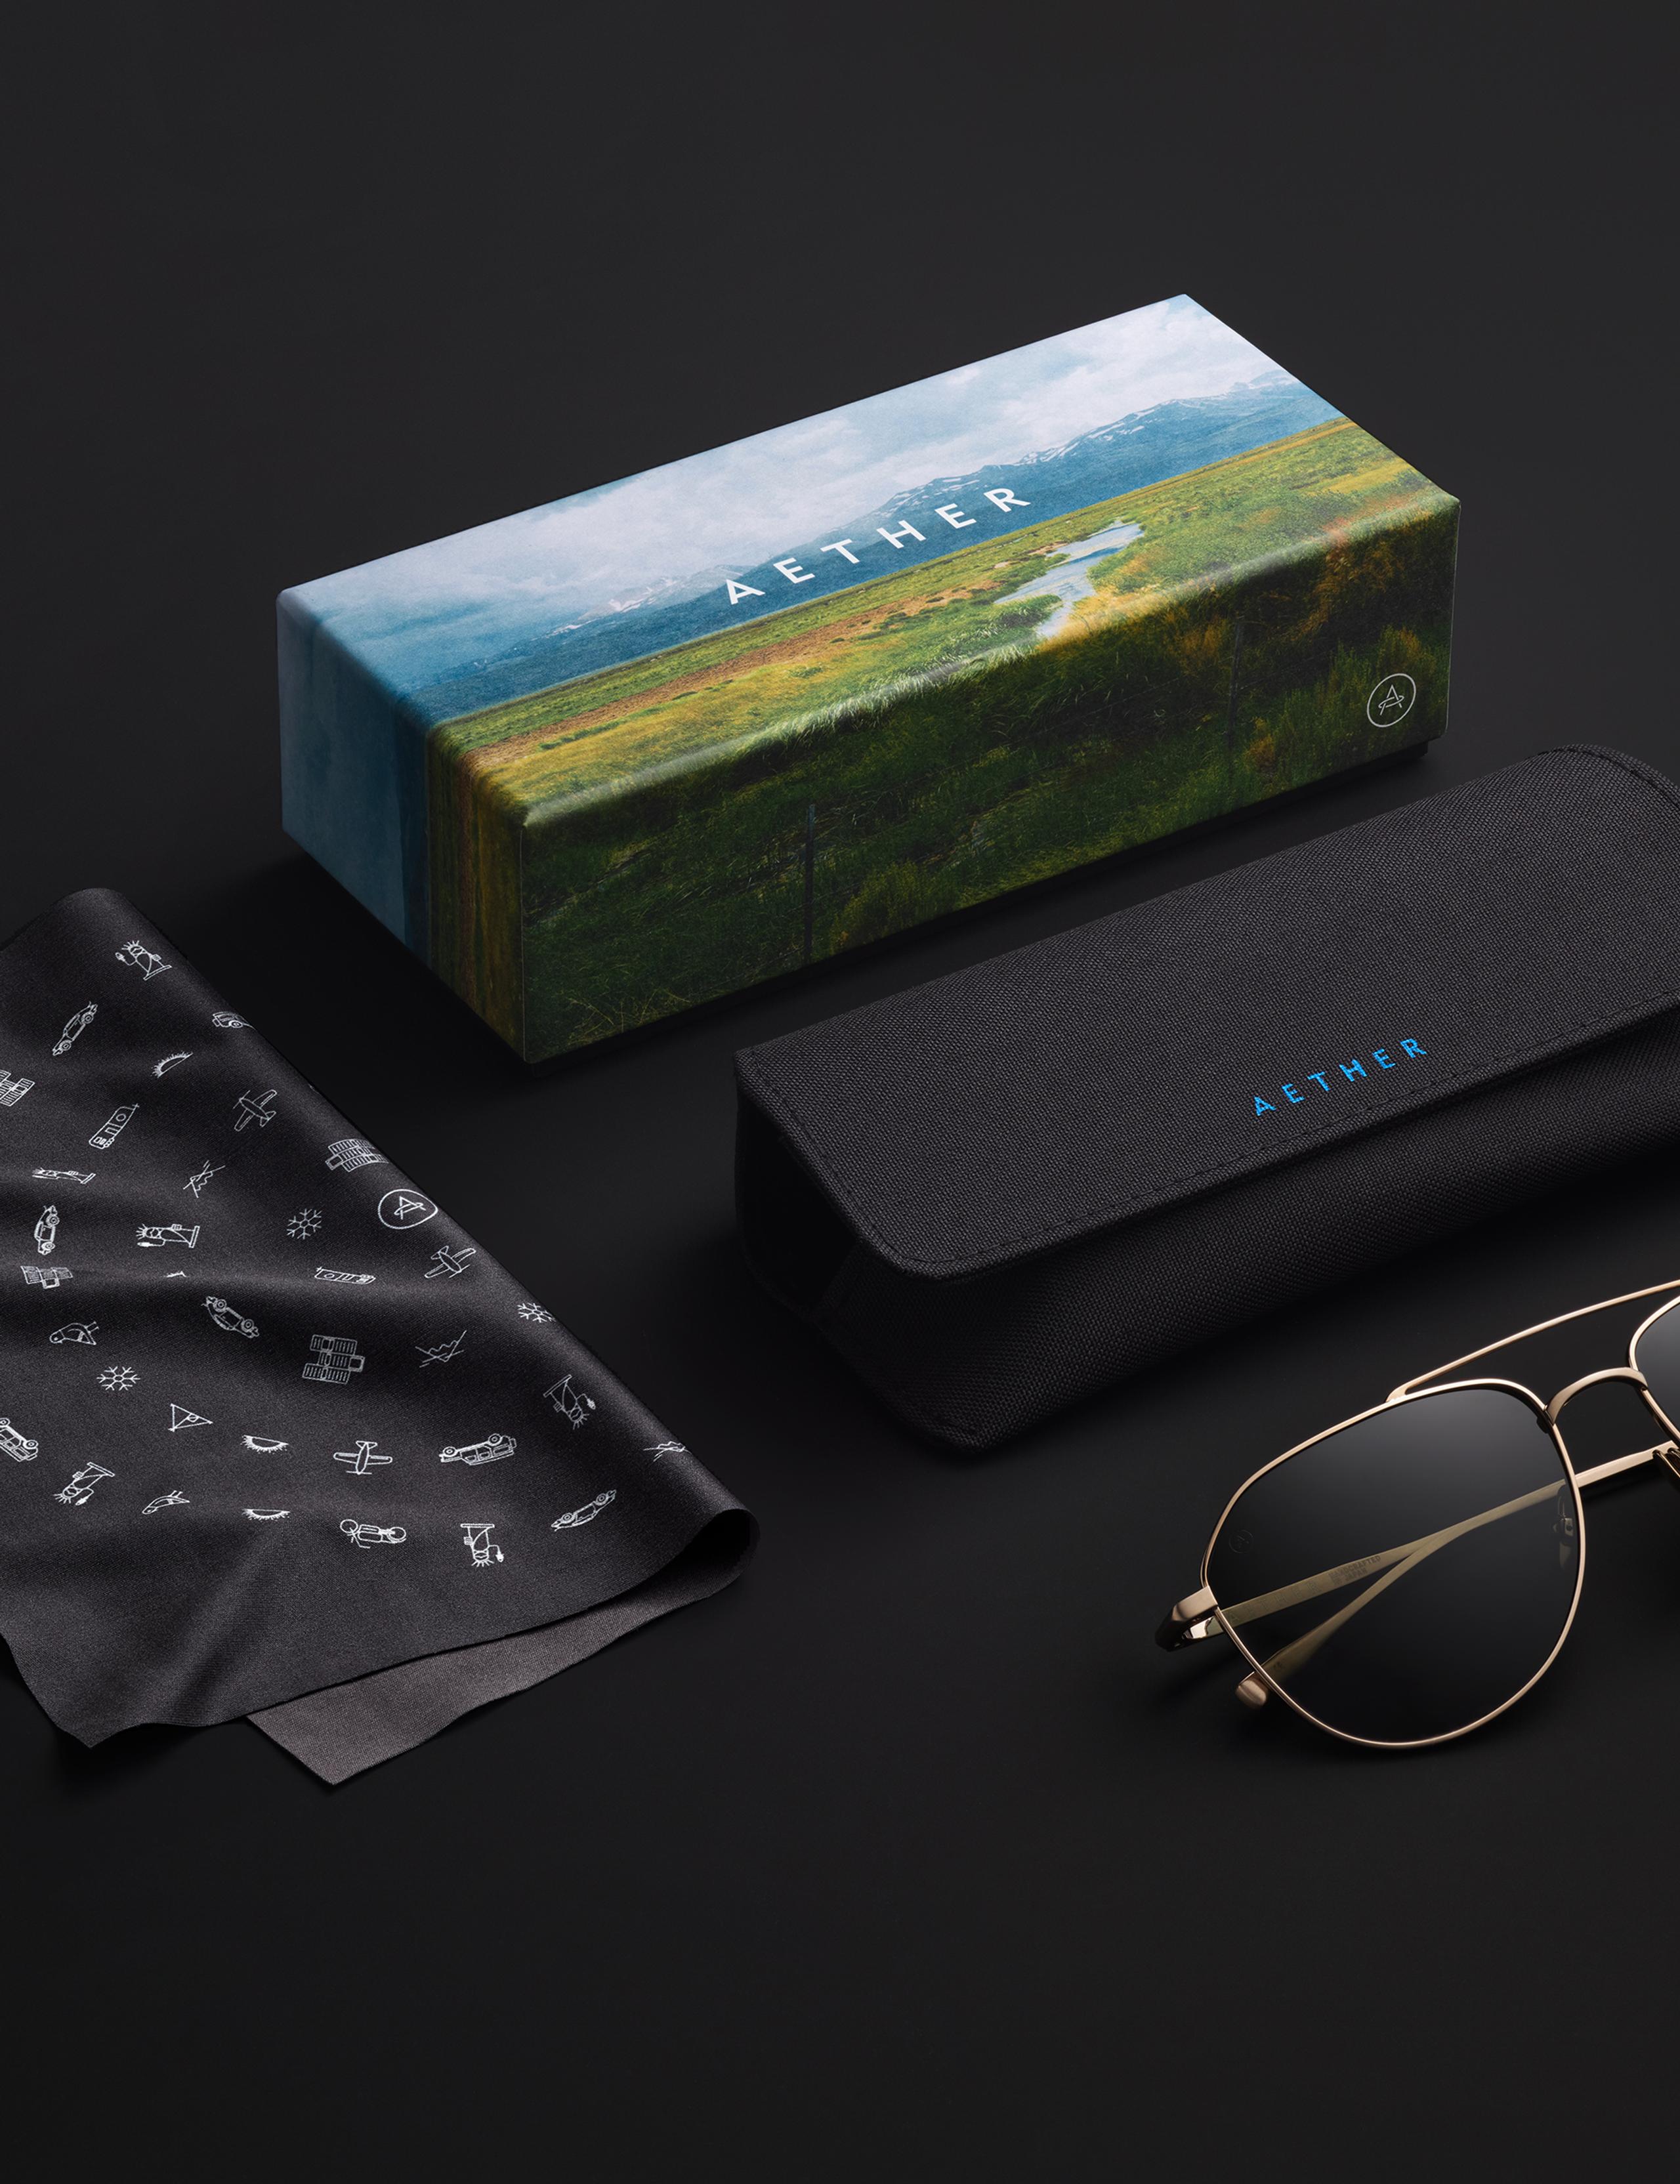 Still life shot of Bryce sunglass with packaging